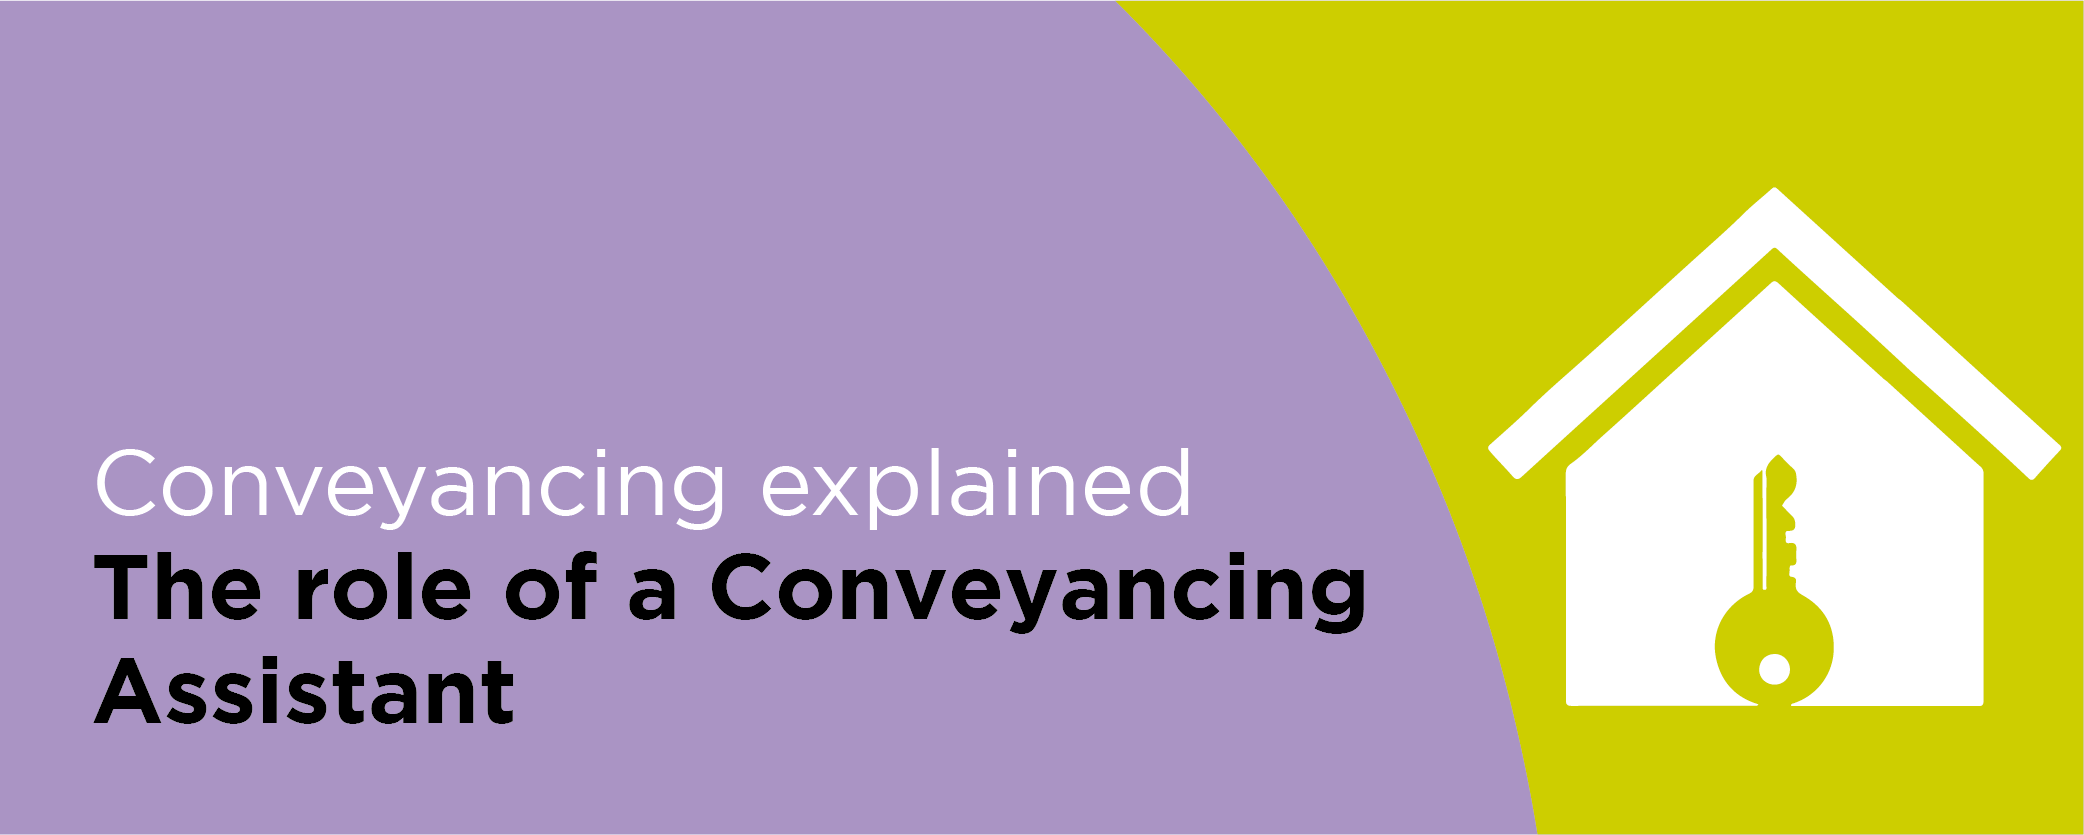 Conveyancing explained: The role of a Conveyancing Assistant